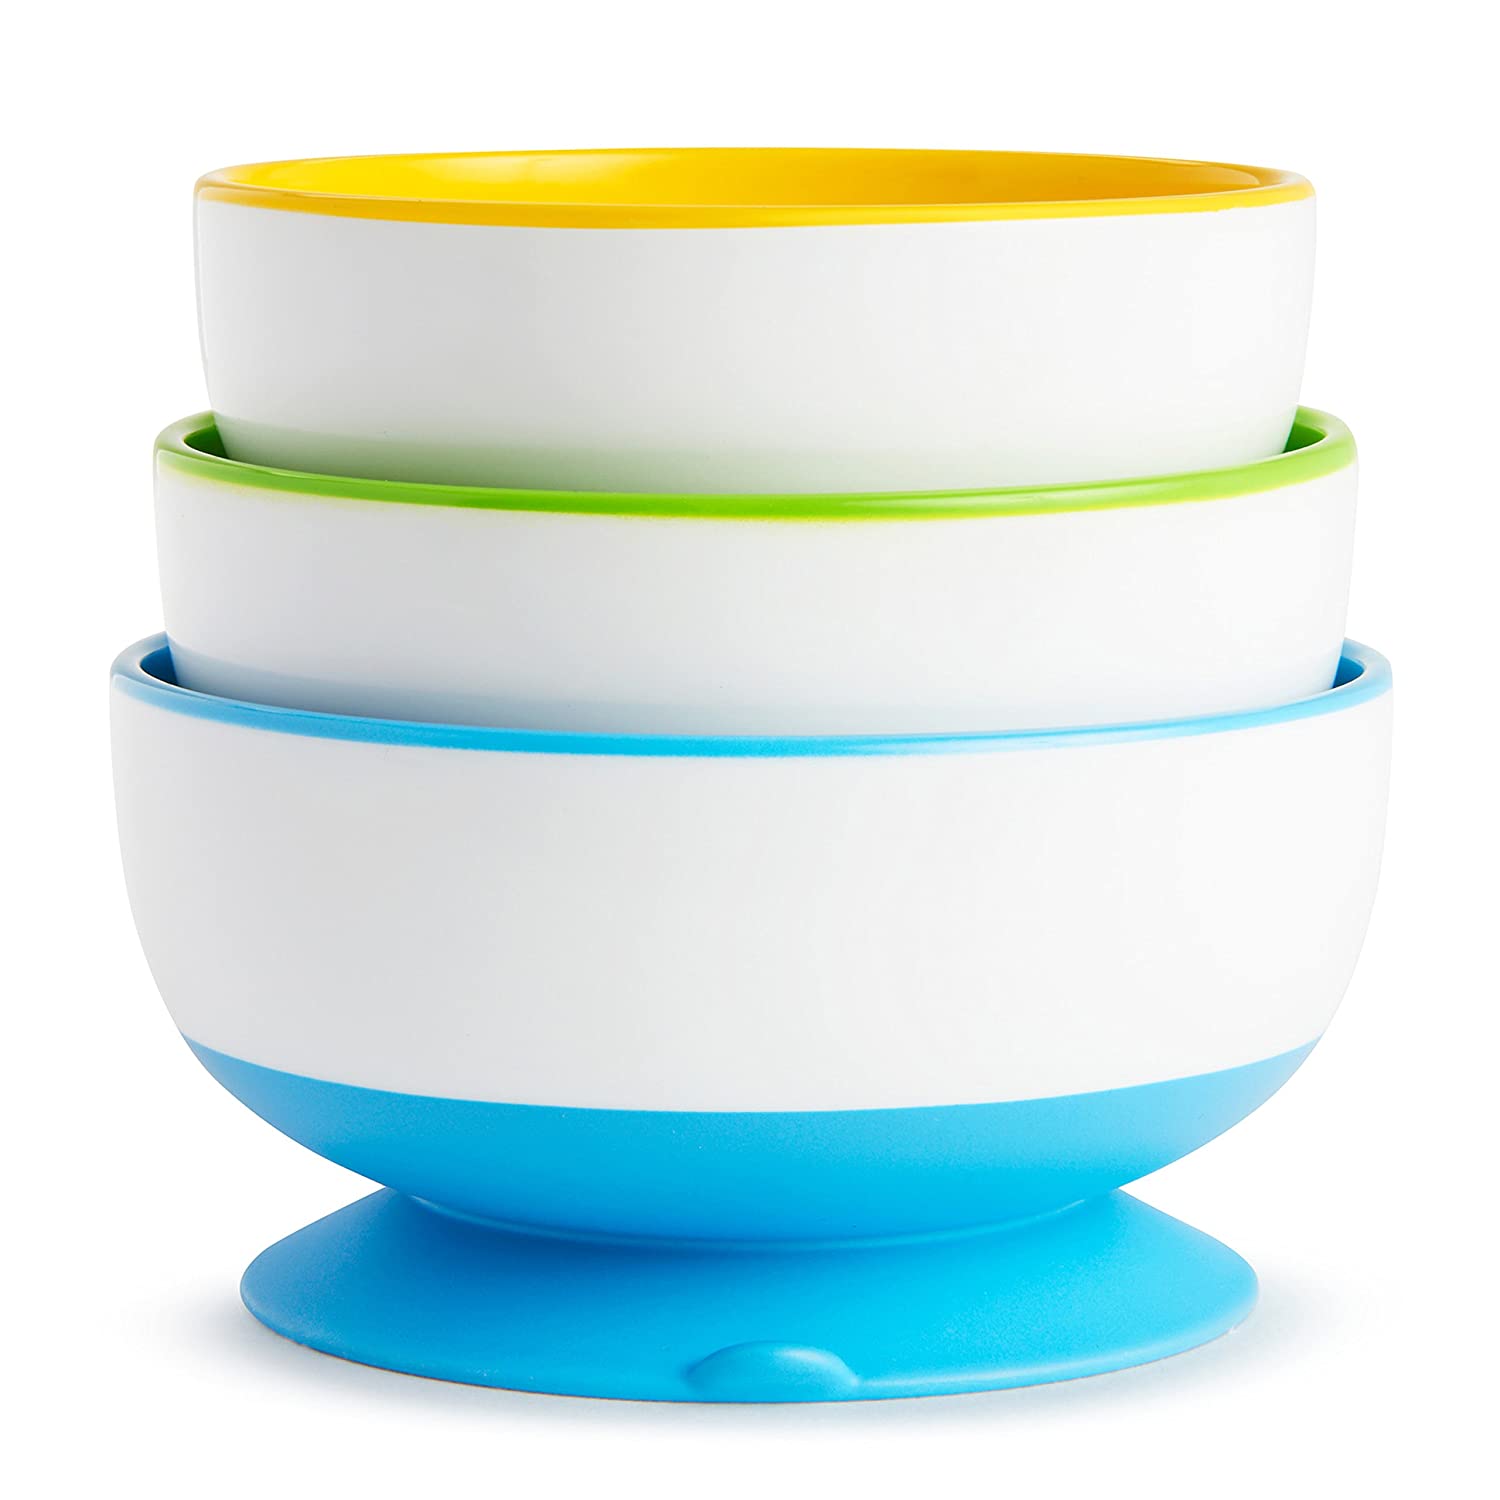 9 Best Baby Bowls and Plates 2023 - Buying Guide 1